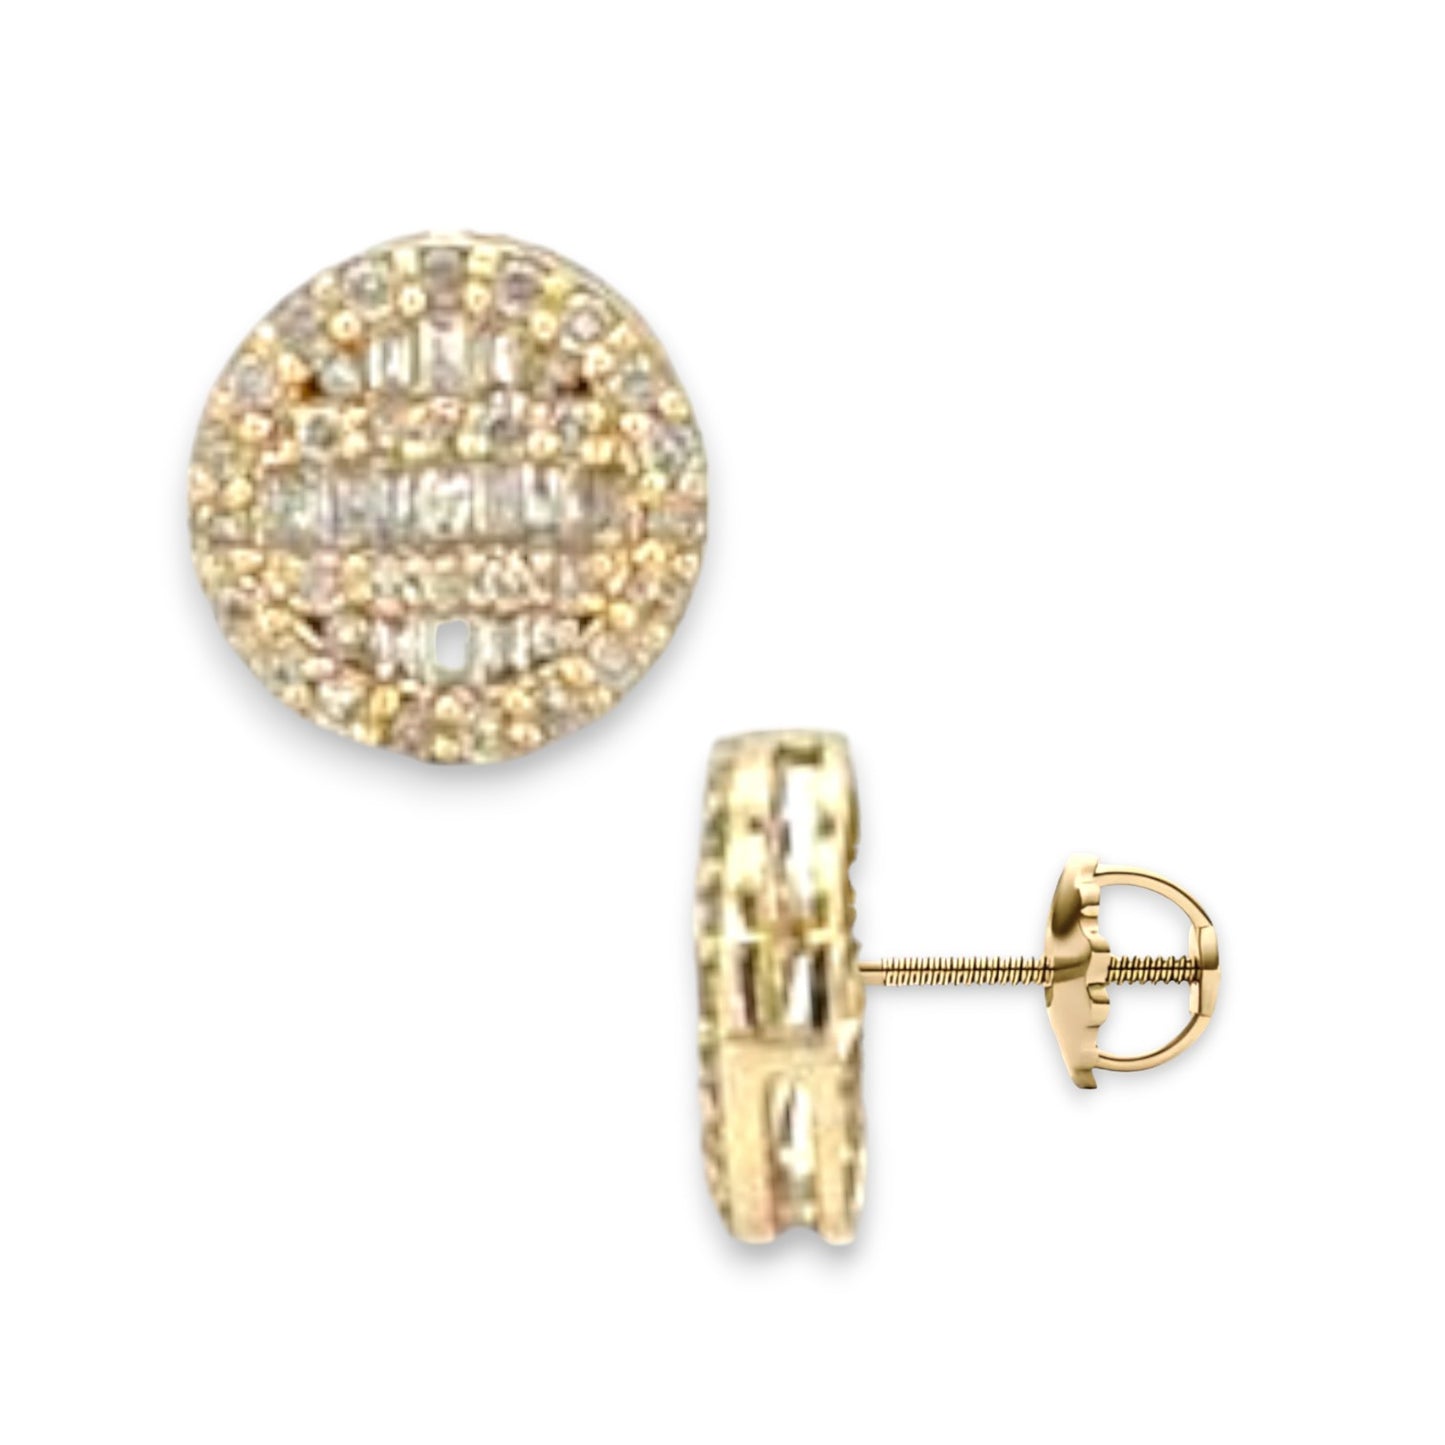 0.50ct Diamond Baguette and Round Stud Earrings - 14k Yellow Gold